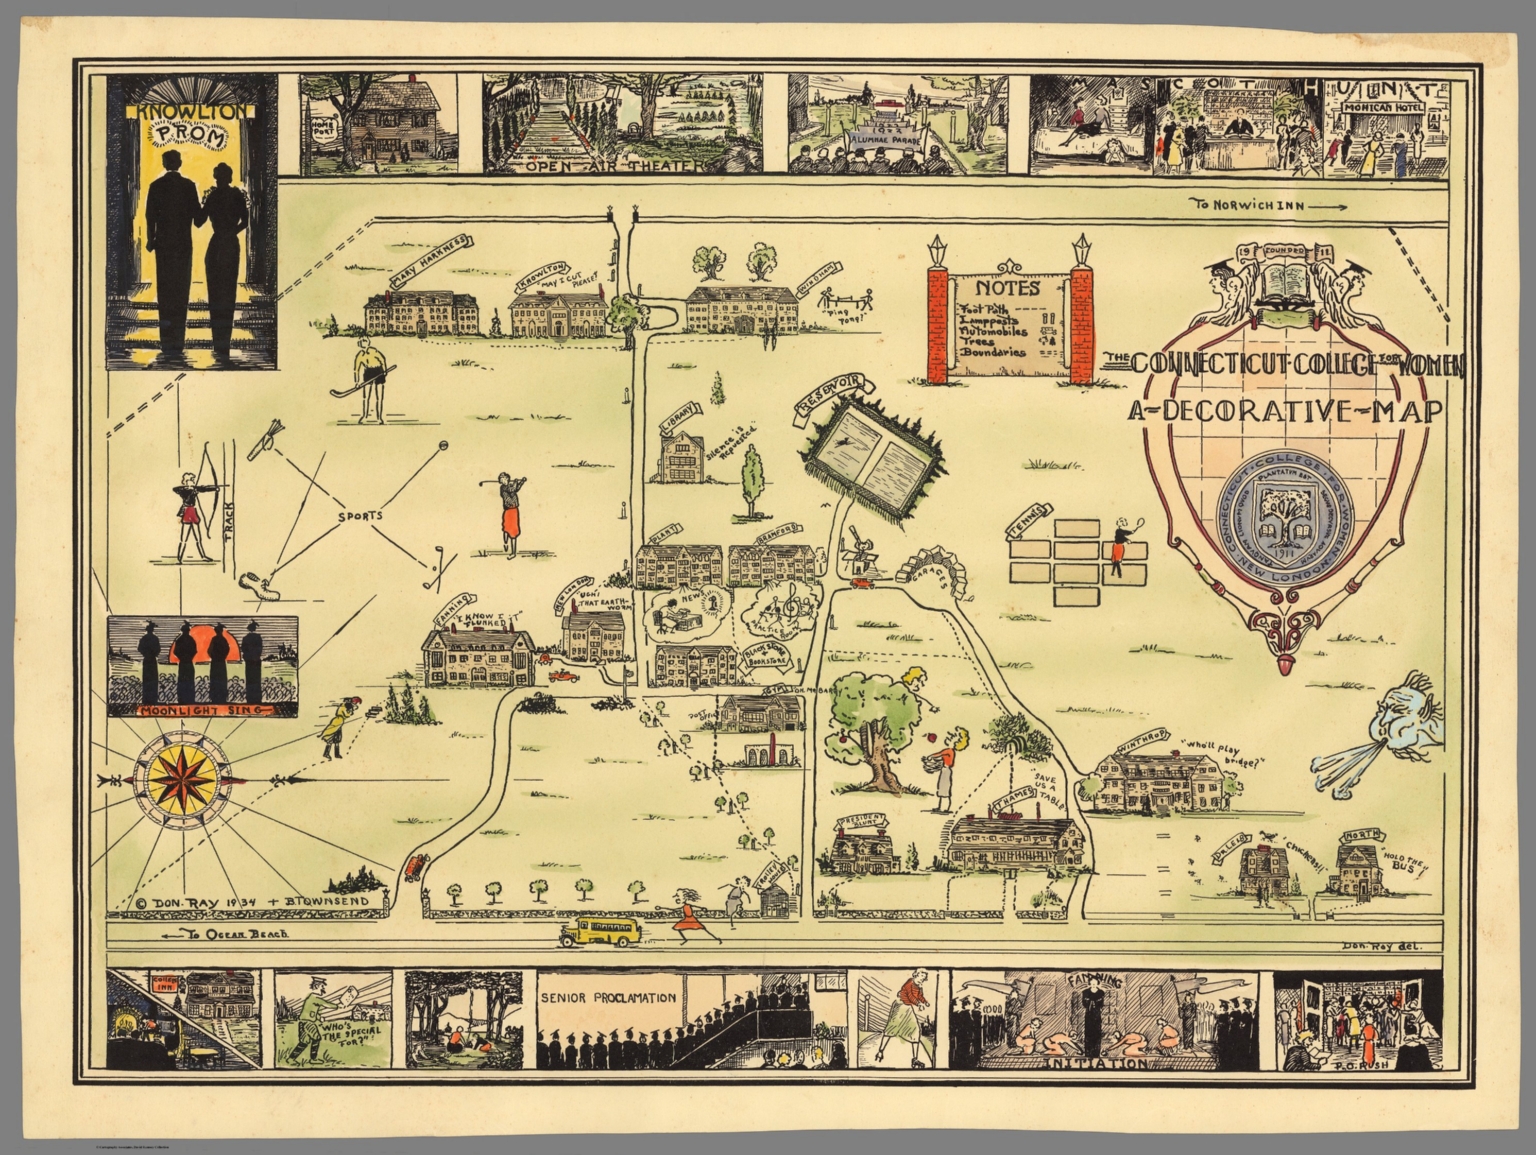 The Connecticut College For Women A Decorative Map David Rumsey